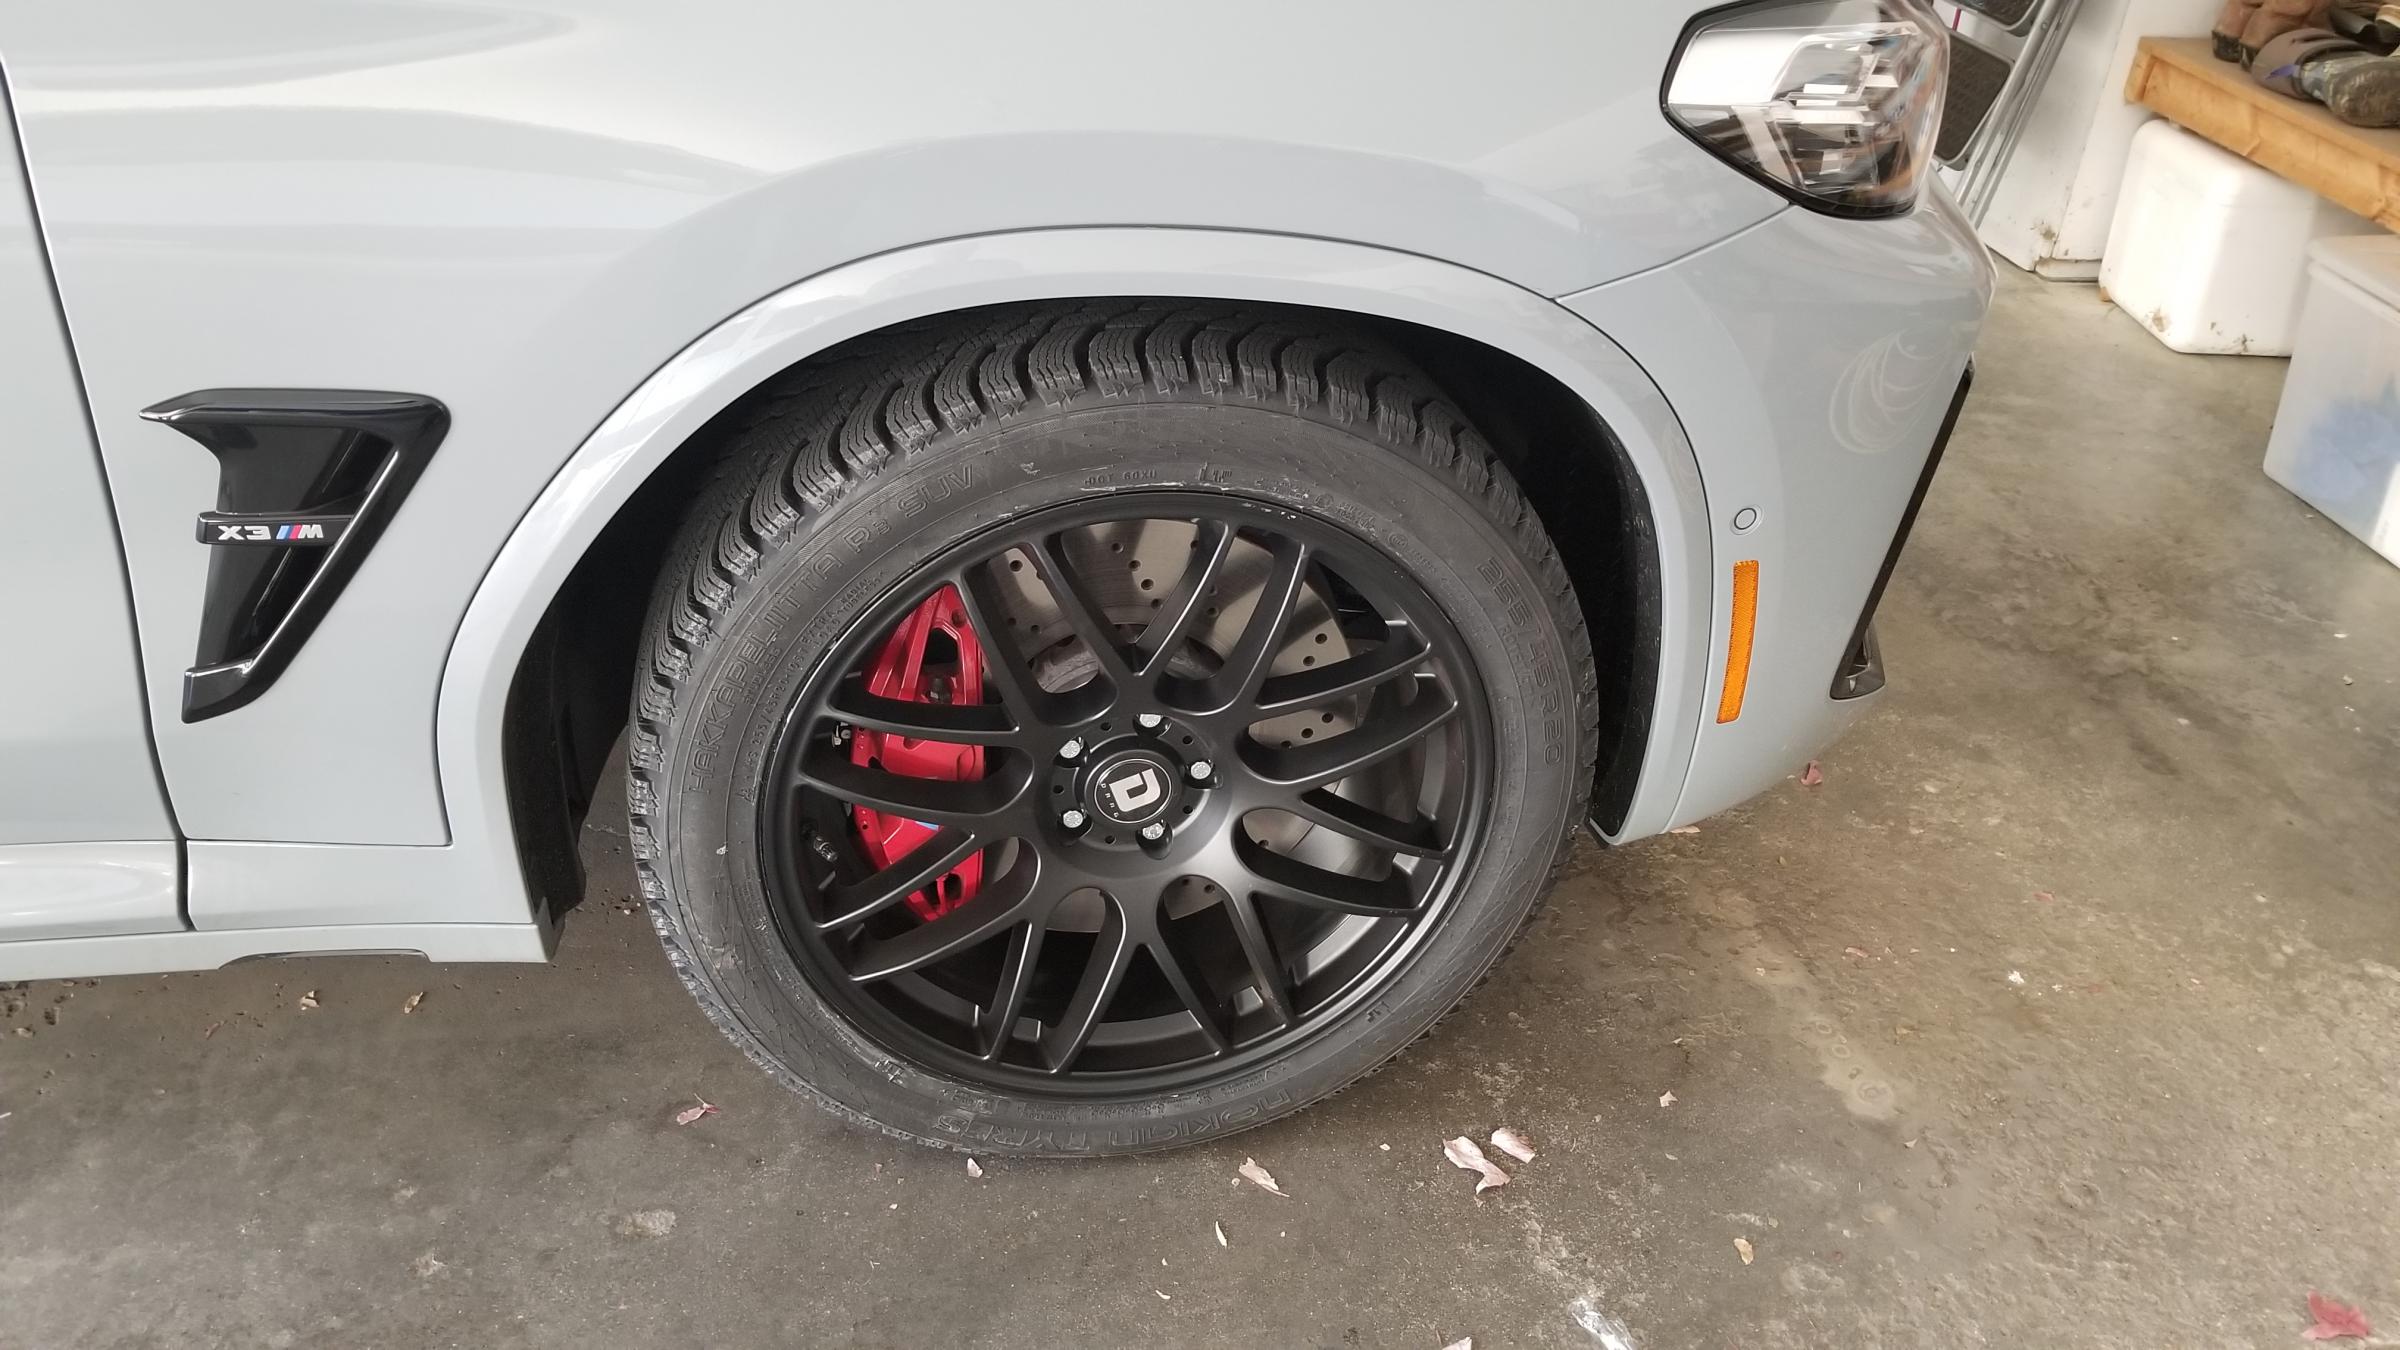 X3M Competition Winter Tire/Wheels - Page 6 - XBimmers | BMW X3 Forum